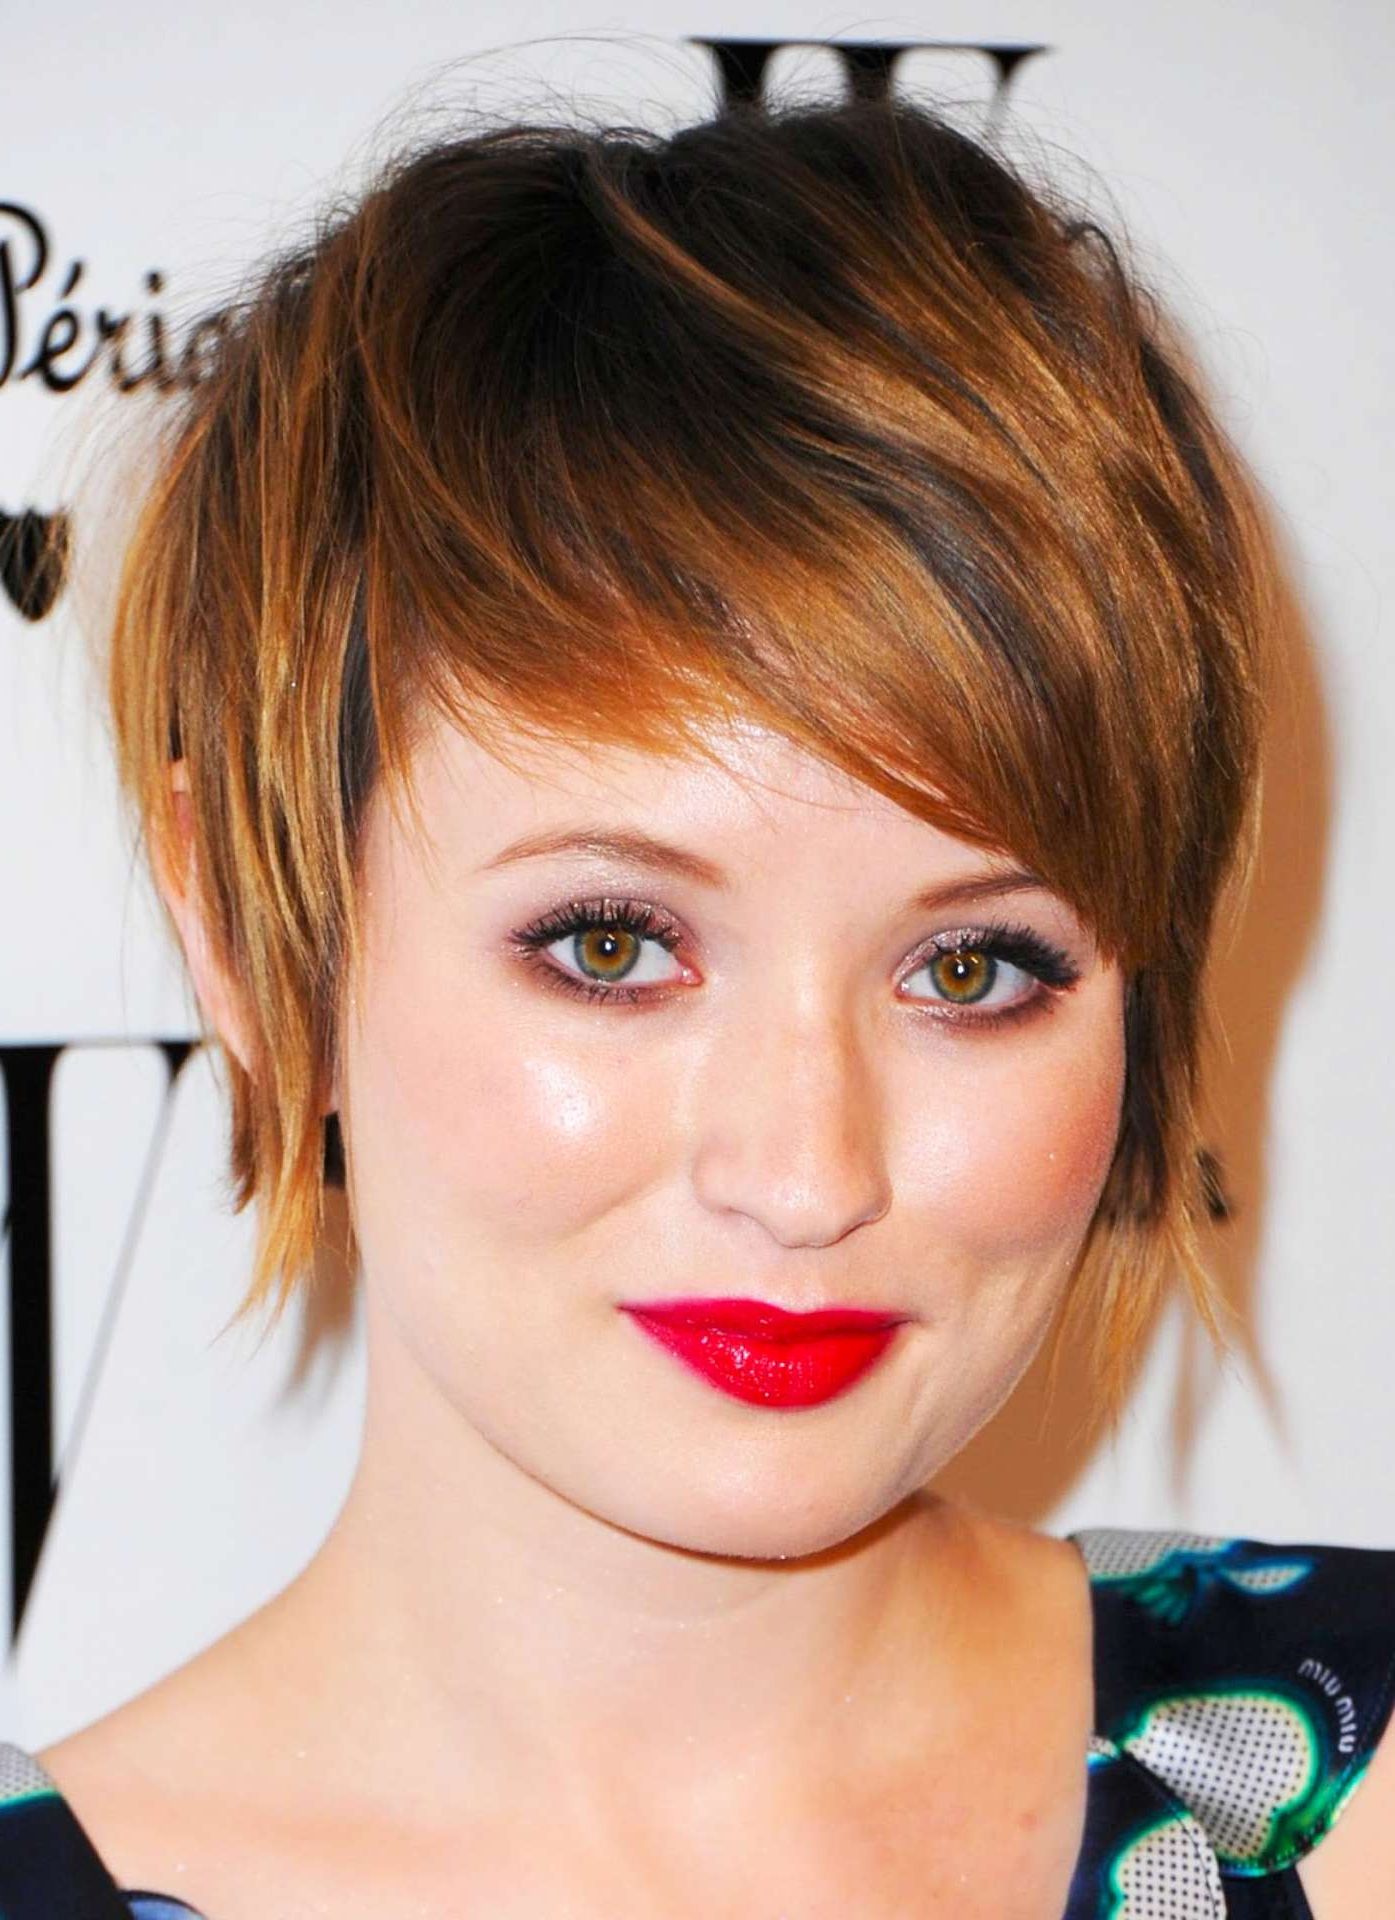 14 Best Short Haircuts For Women With Round Faces Inside Short Hairstyles For Round Faces Curly Hair (View 8 of 25)